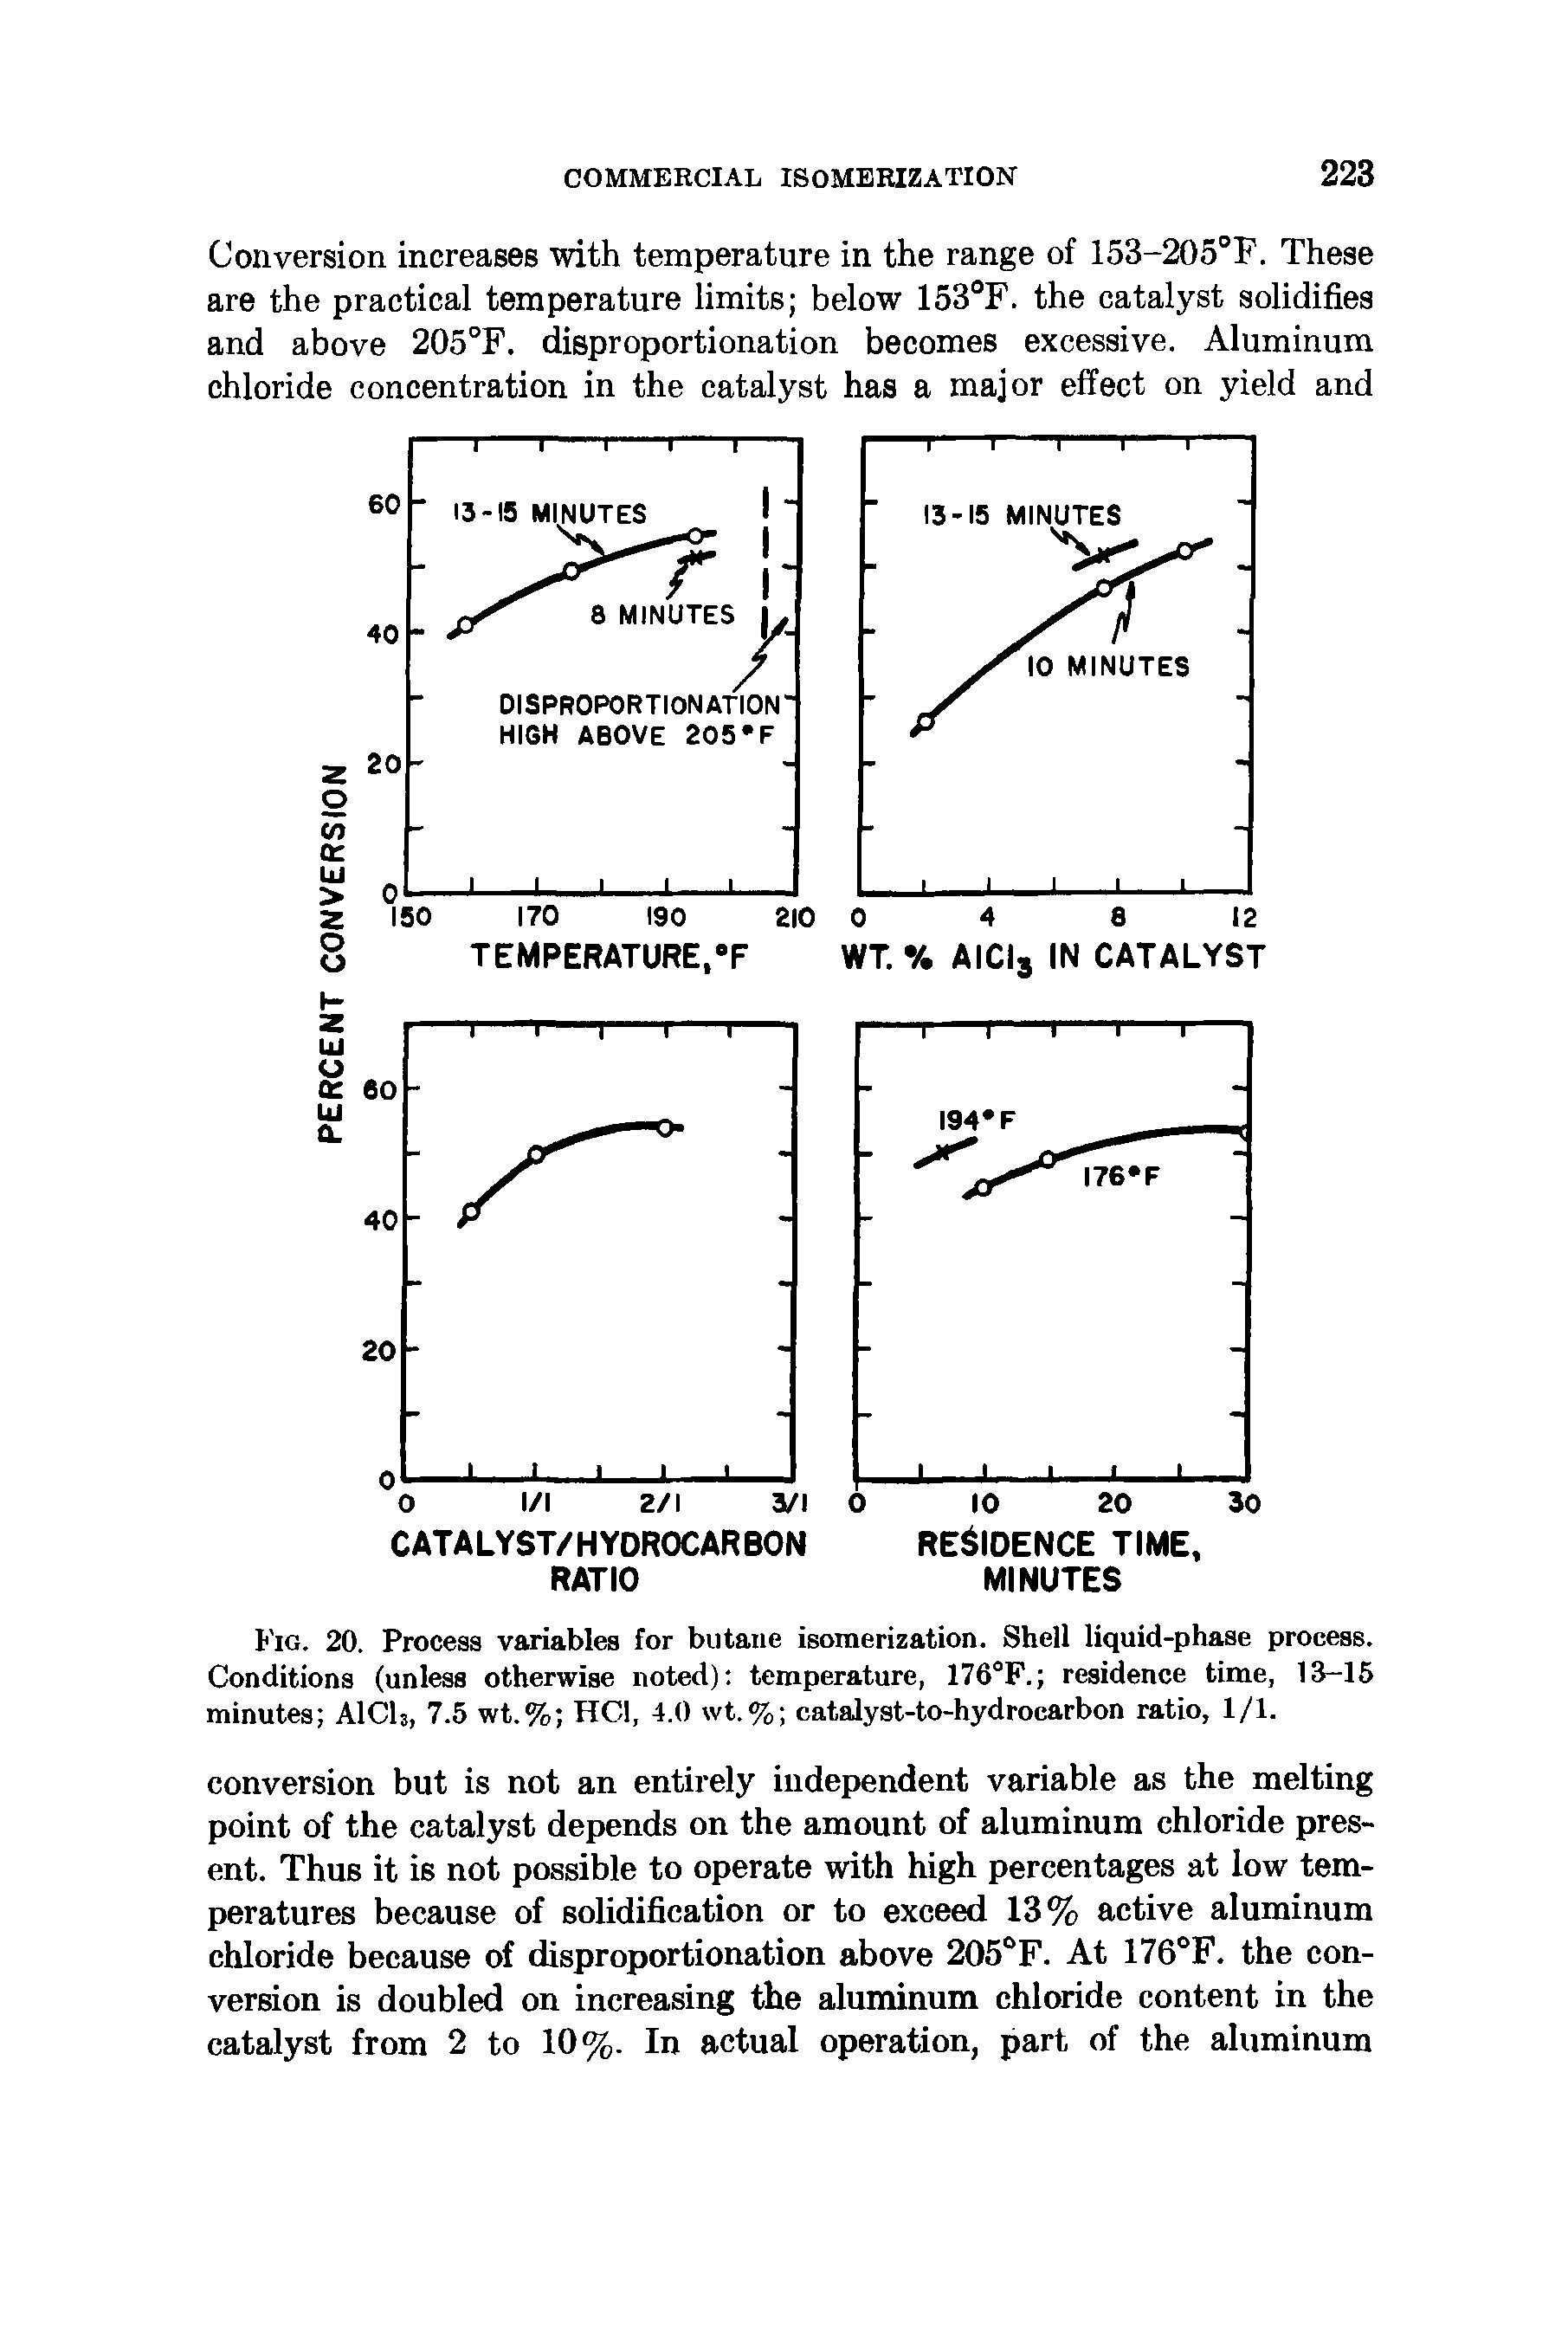 Fig. 20. Process variables for butane isomerization. Shell liquid-phase process. Conditions (unless otherwise noted) temperature, 176°F. residence time, 13-15 minutes AlCU, 7.5 wt.% HCl, 4.0 wt.% catalyst-to-hydrocarbon ratio, 1/1.